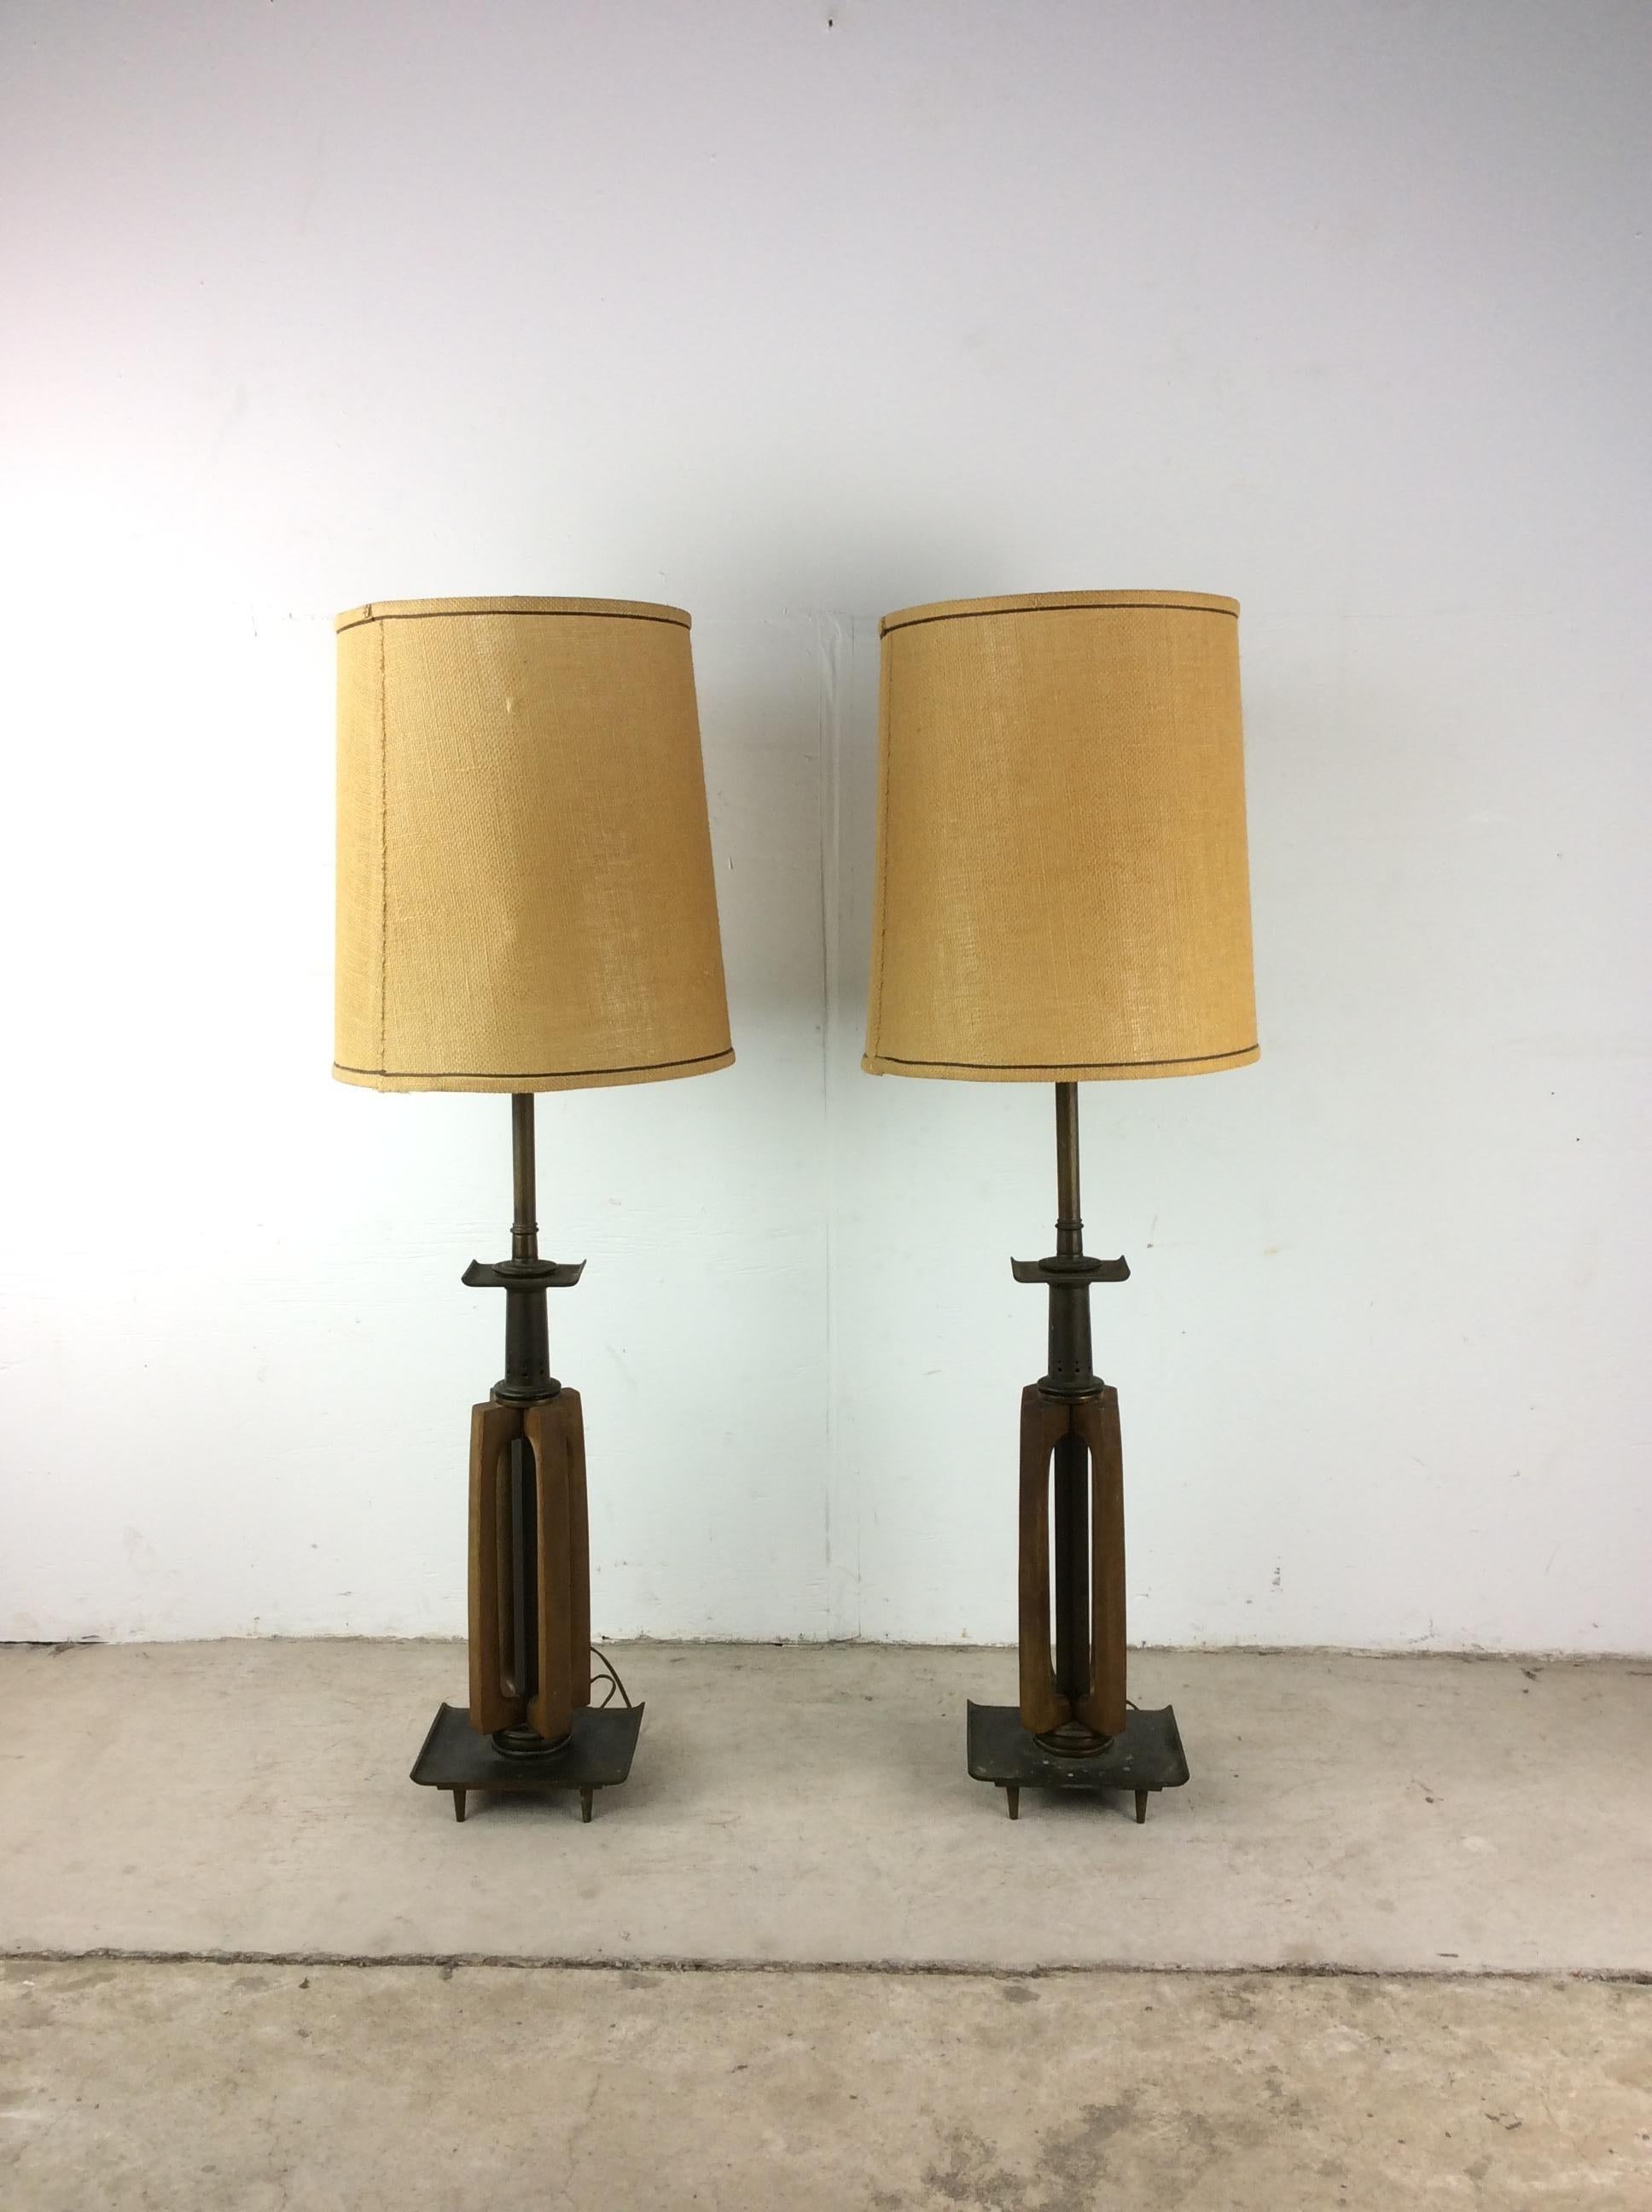 Pair of Tall Mid Century Modern Brass & Walnut Table Lamps In Good Condition For Sale In Freehold, NJ